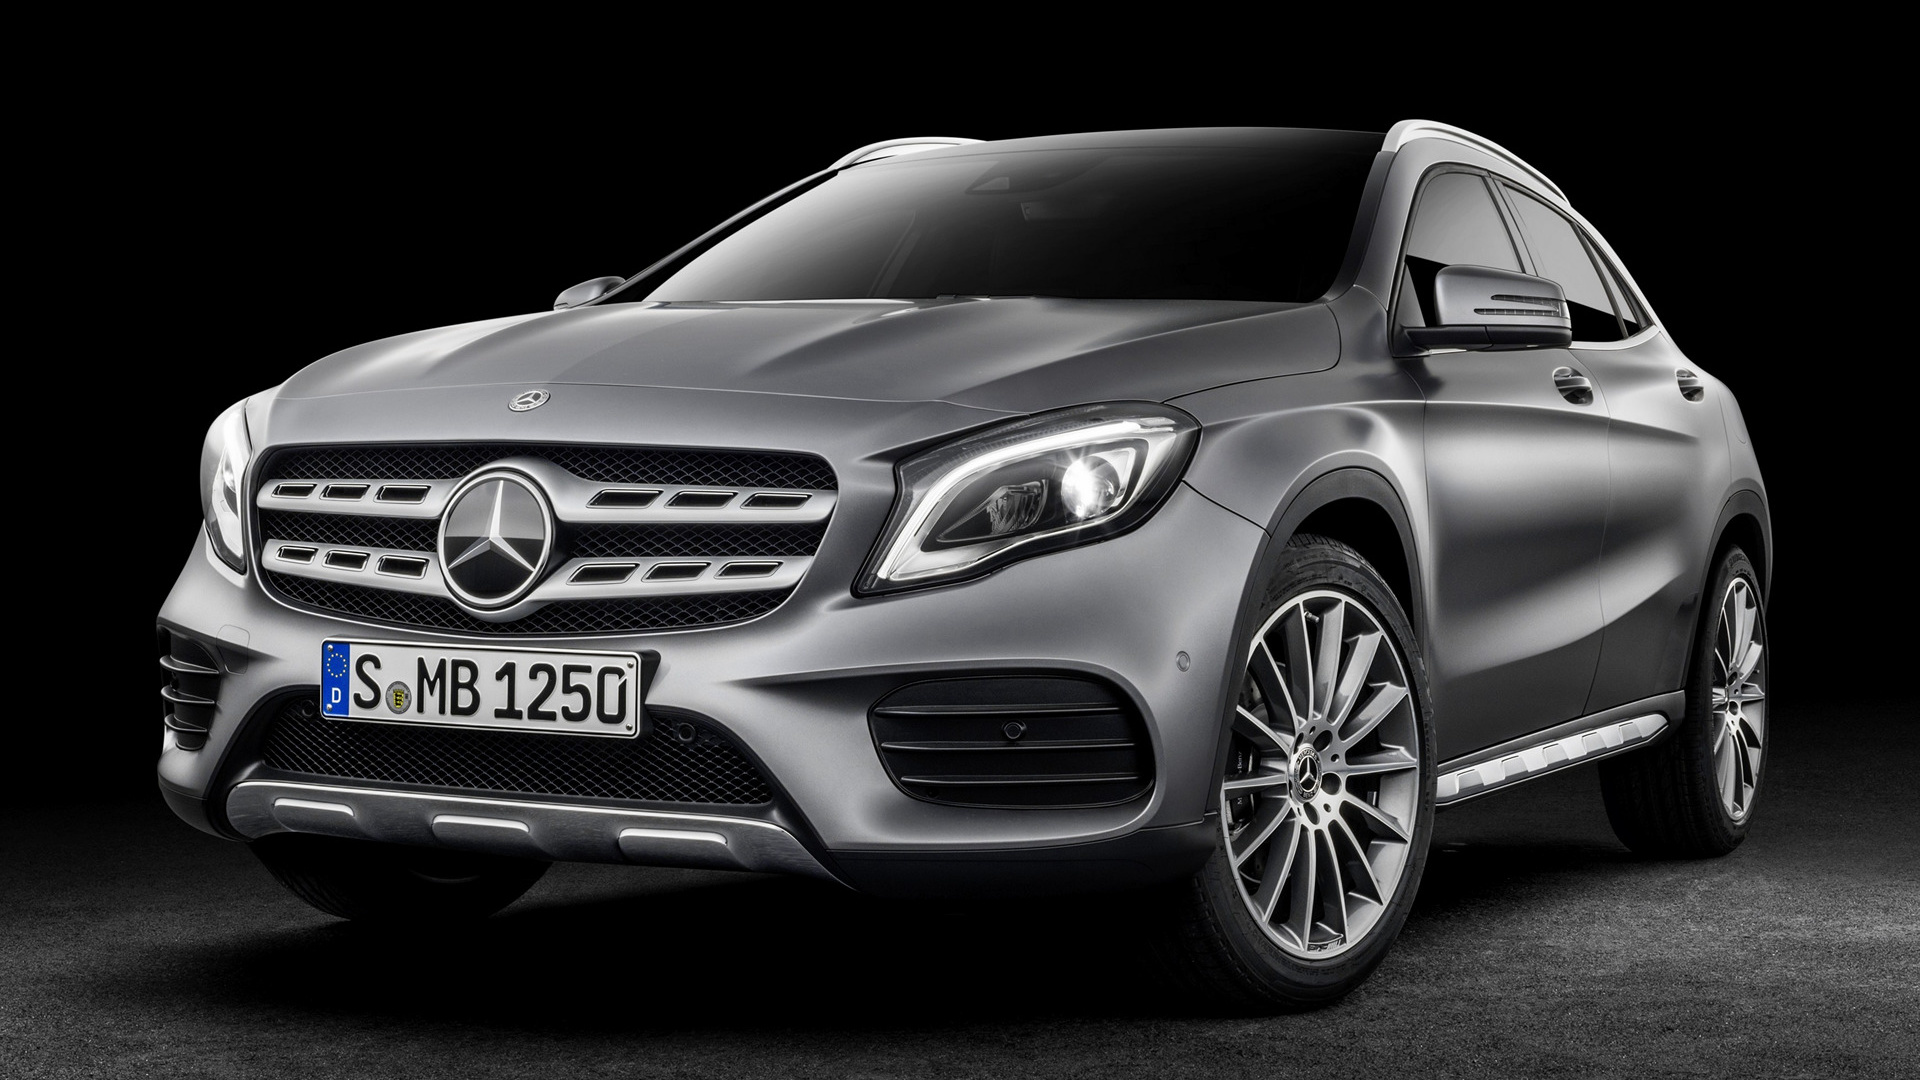 Download mobile wallpaper Suv, Mercedes Benz, Compact Car, Vehicles, Silver Car, Mercedes Benz Gla Class, Crossover Car for free.